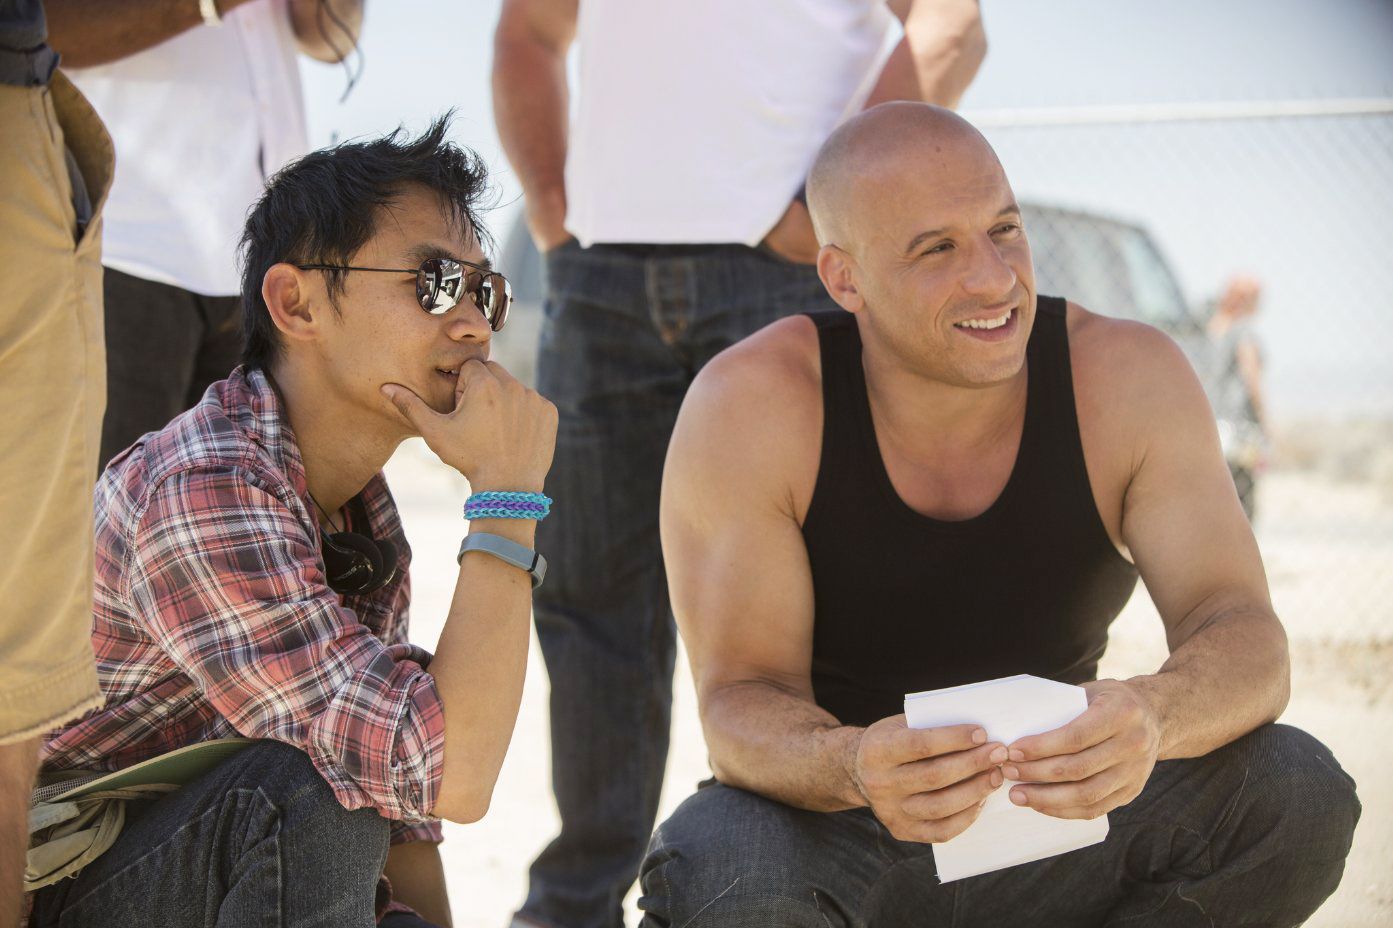 Furious 7 Porn - Director James Wan on How Furious 7 Is Like Snow White